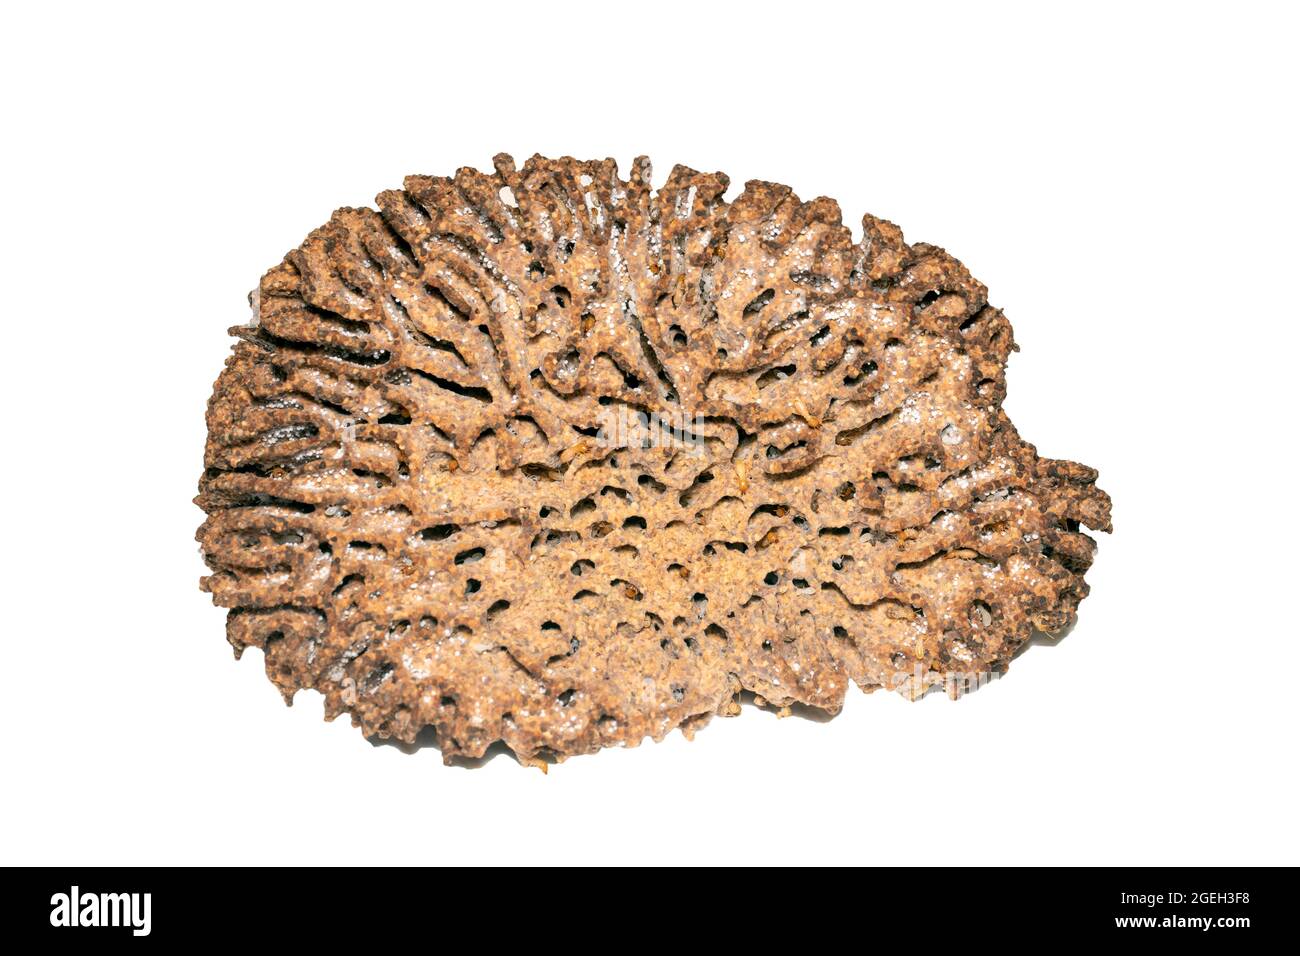 Image of termite nest and little termites on white background. Insect. Animal. Stock Photo